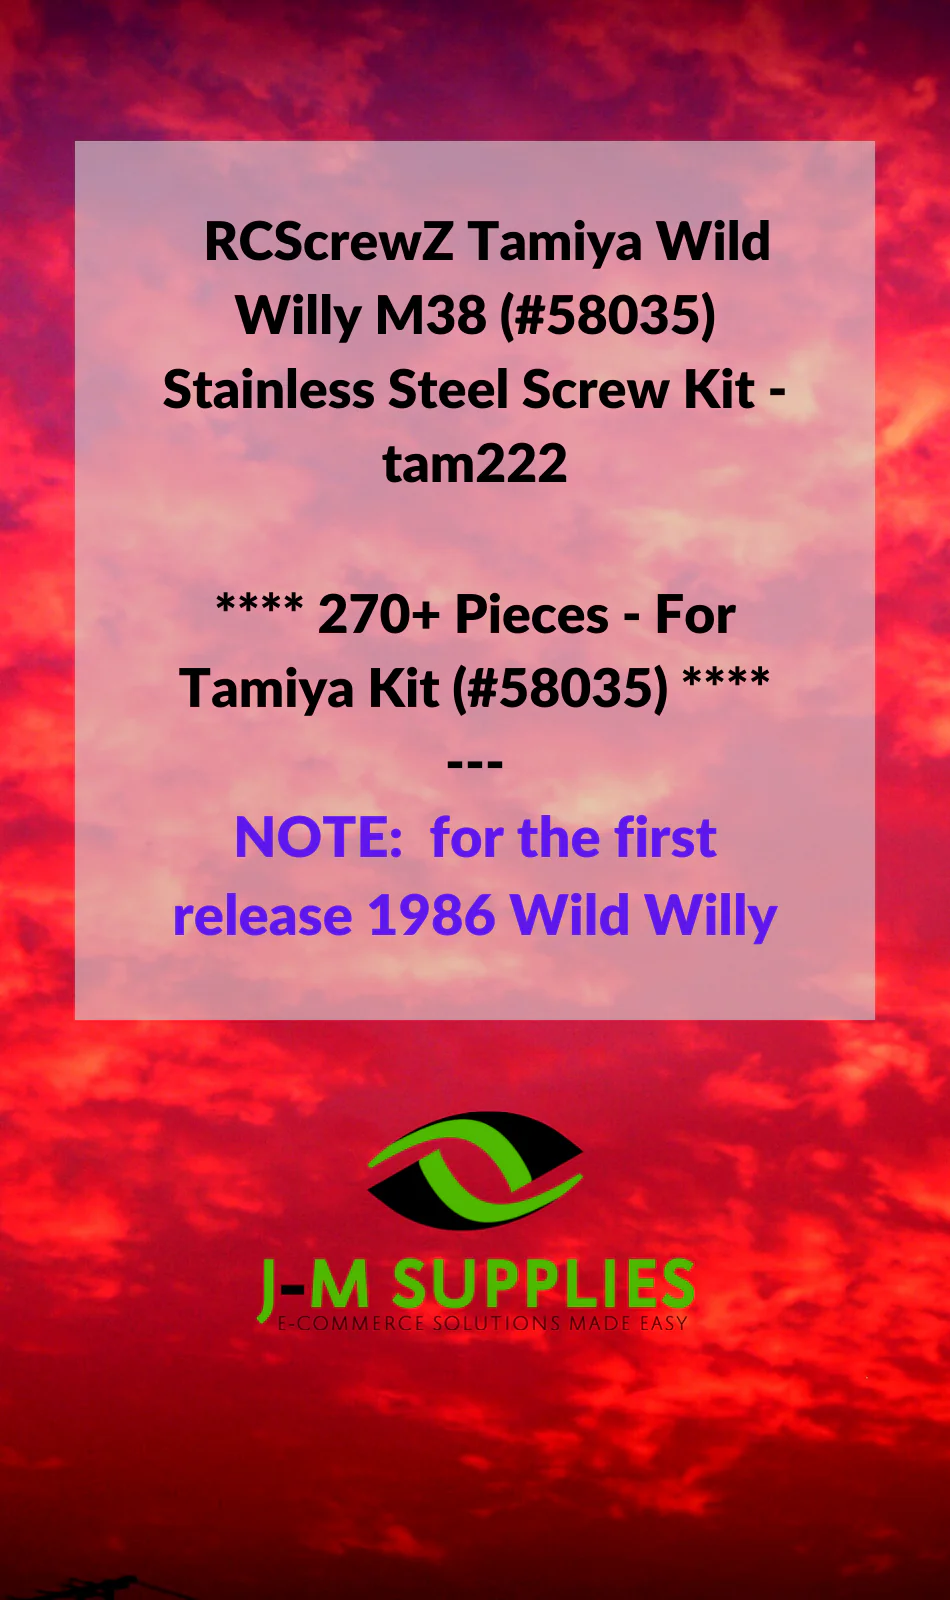 RCScrewZ Stainless Steel Screw Kit tam222 for Tamiya Wild Willy M38 #58035 - Picture 2 of 12